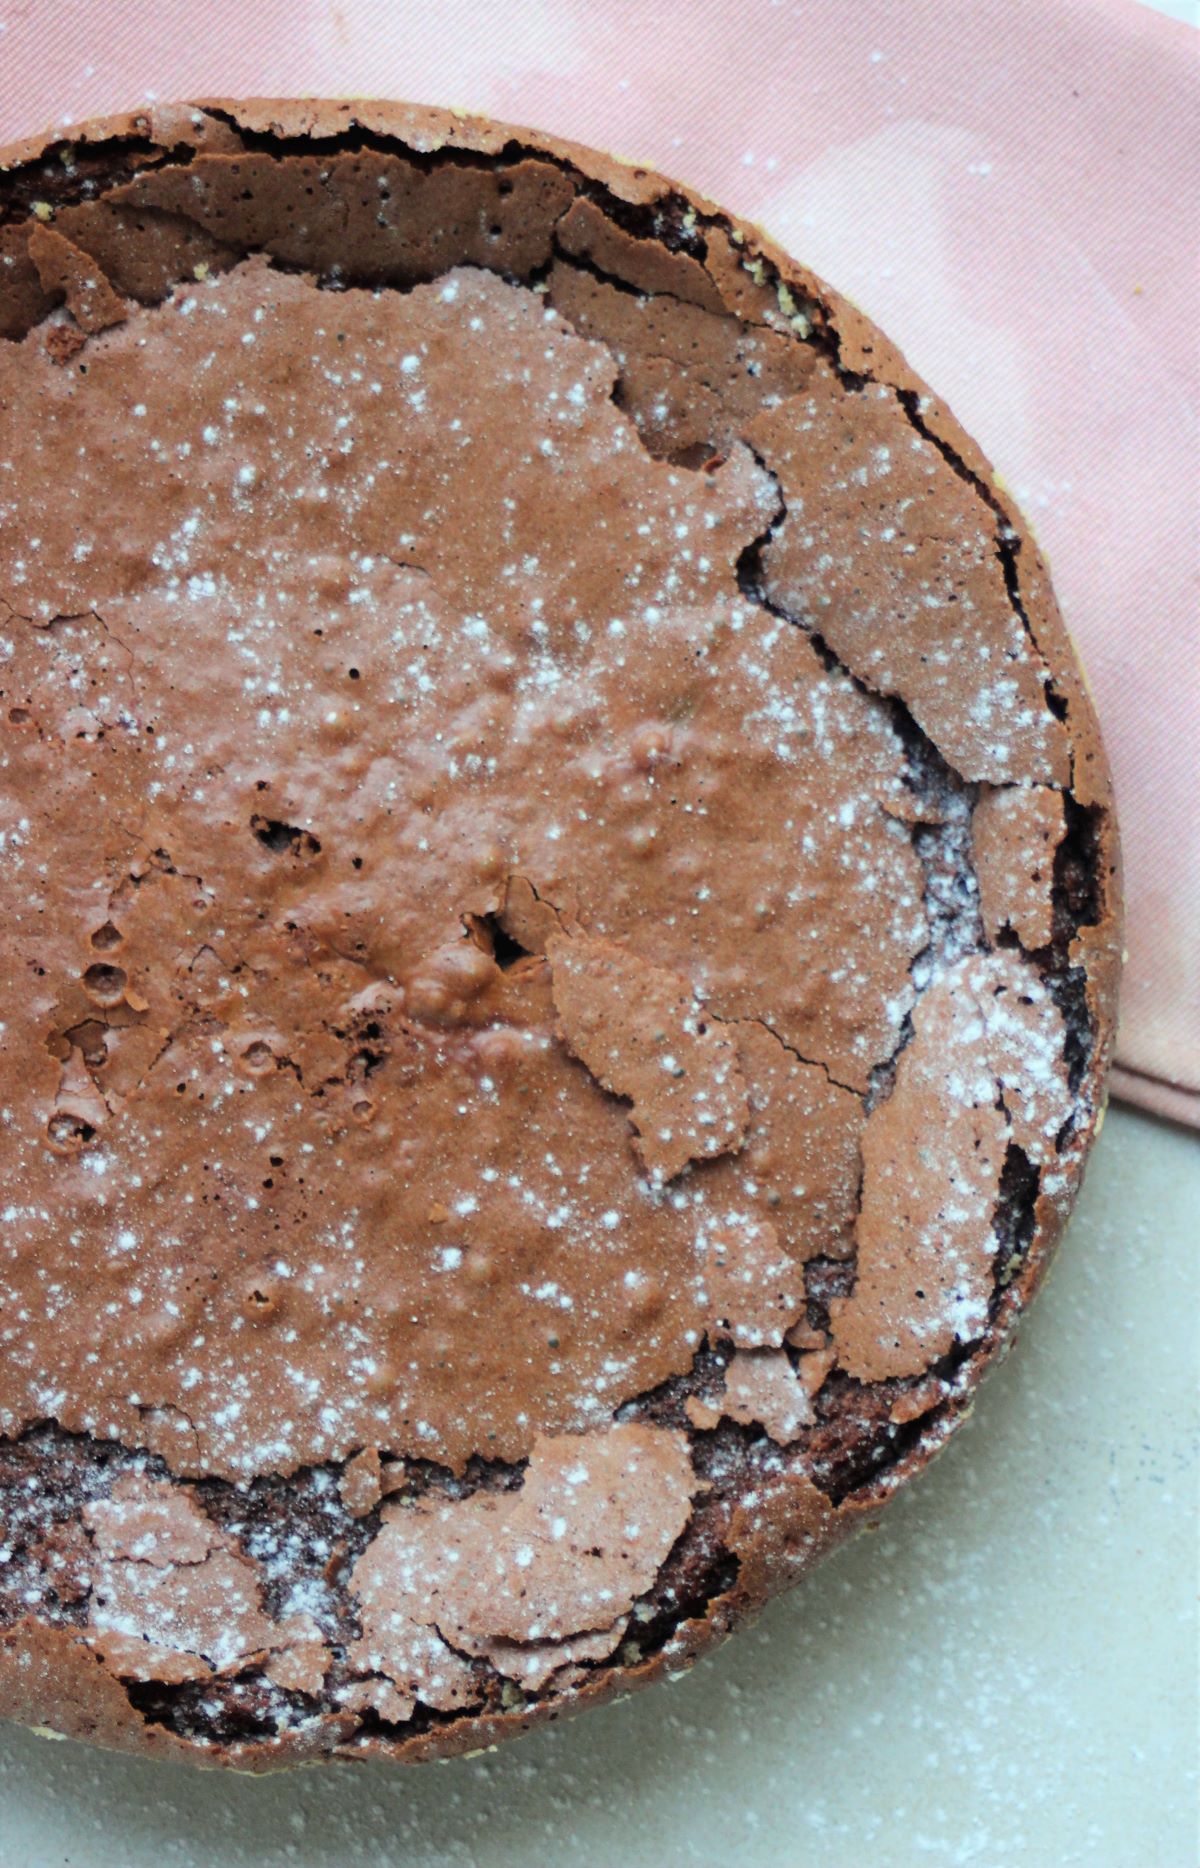 Chocolate cake sprinkled with powdered sugar seen from above.